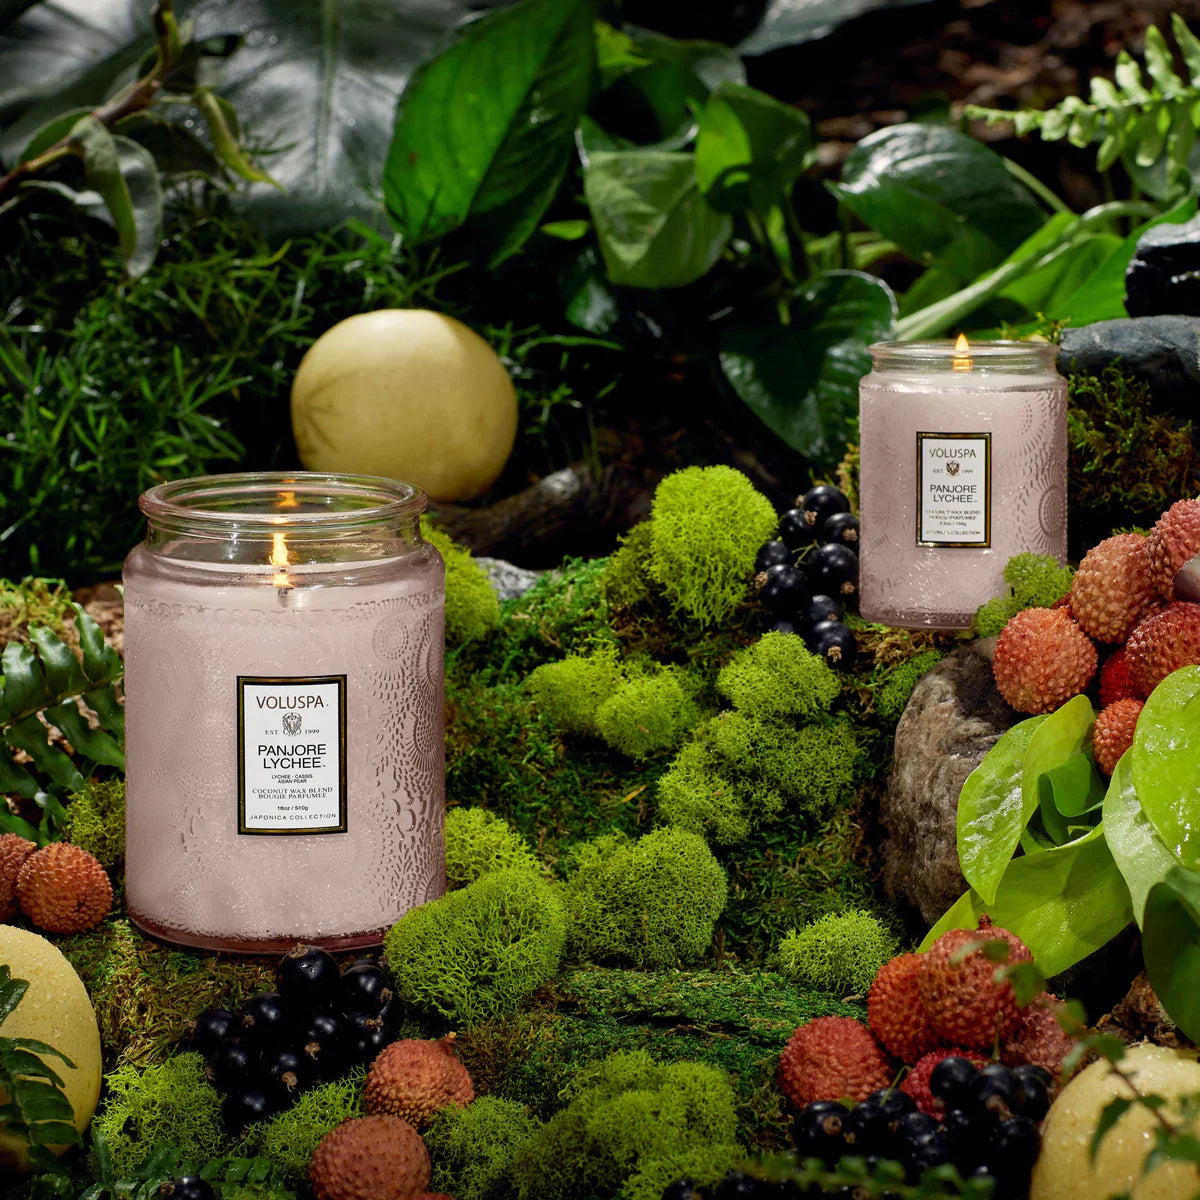 Panjore Lychee Candles in nature scene